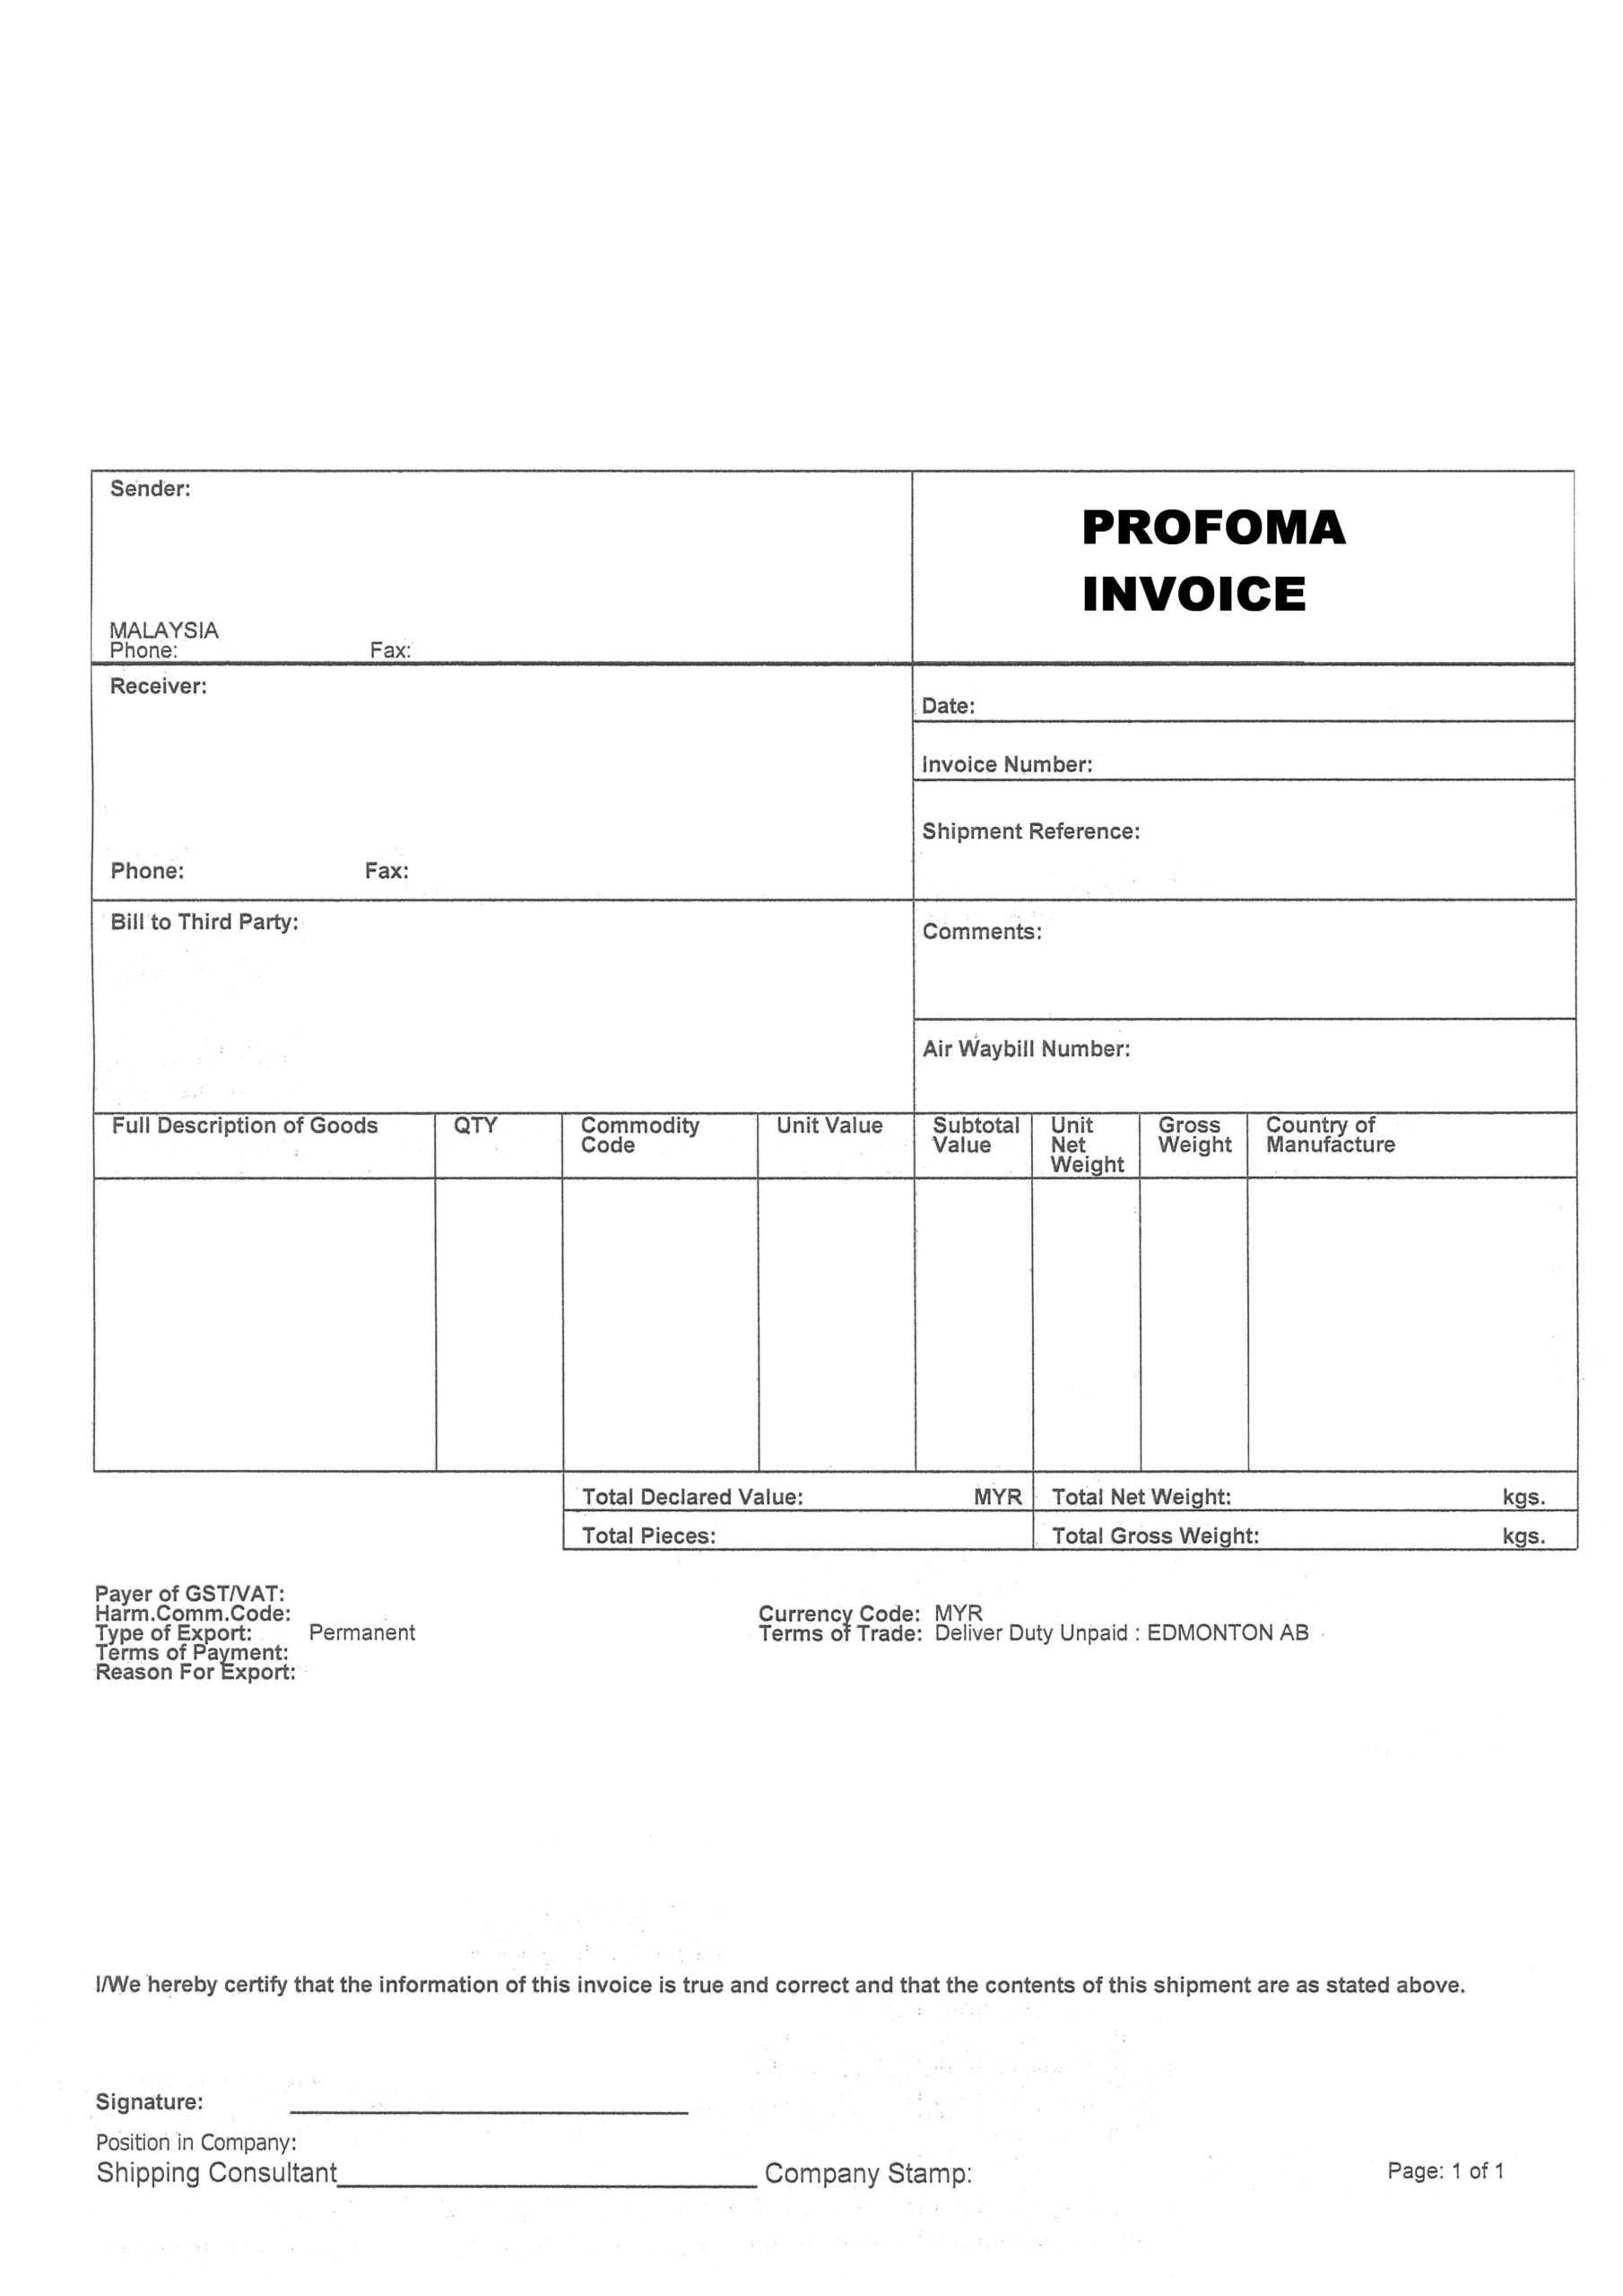 Shipment Requires A Commercial Invoice * Invoice Template Ideas Intended For International Shipping Invoice Template